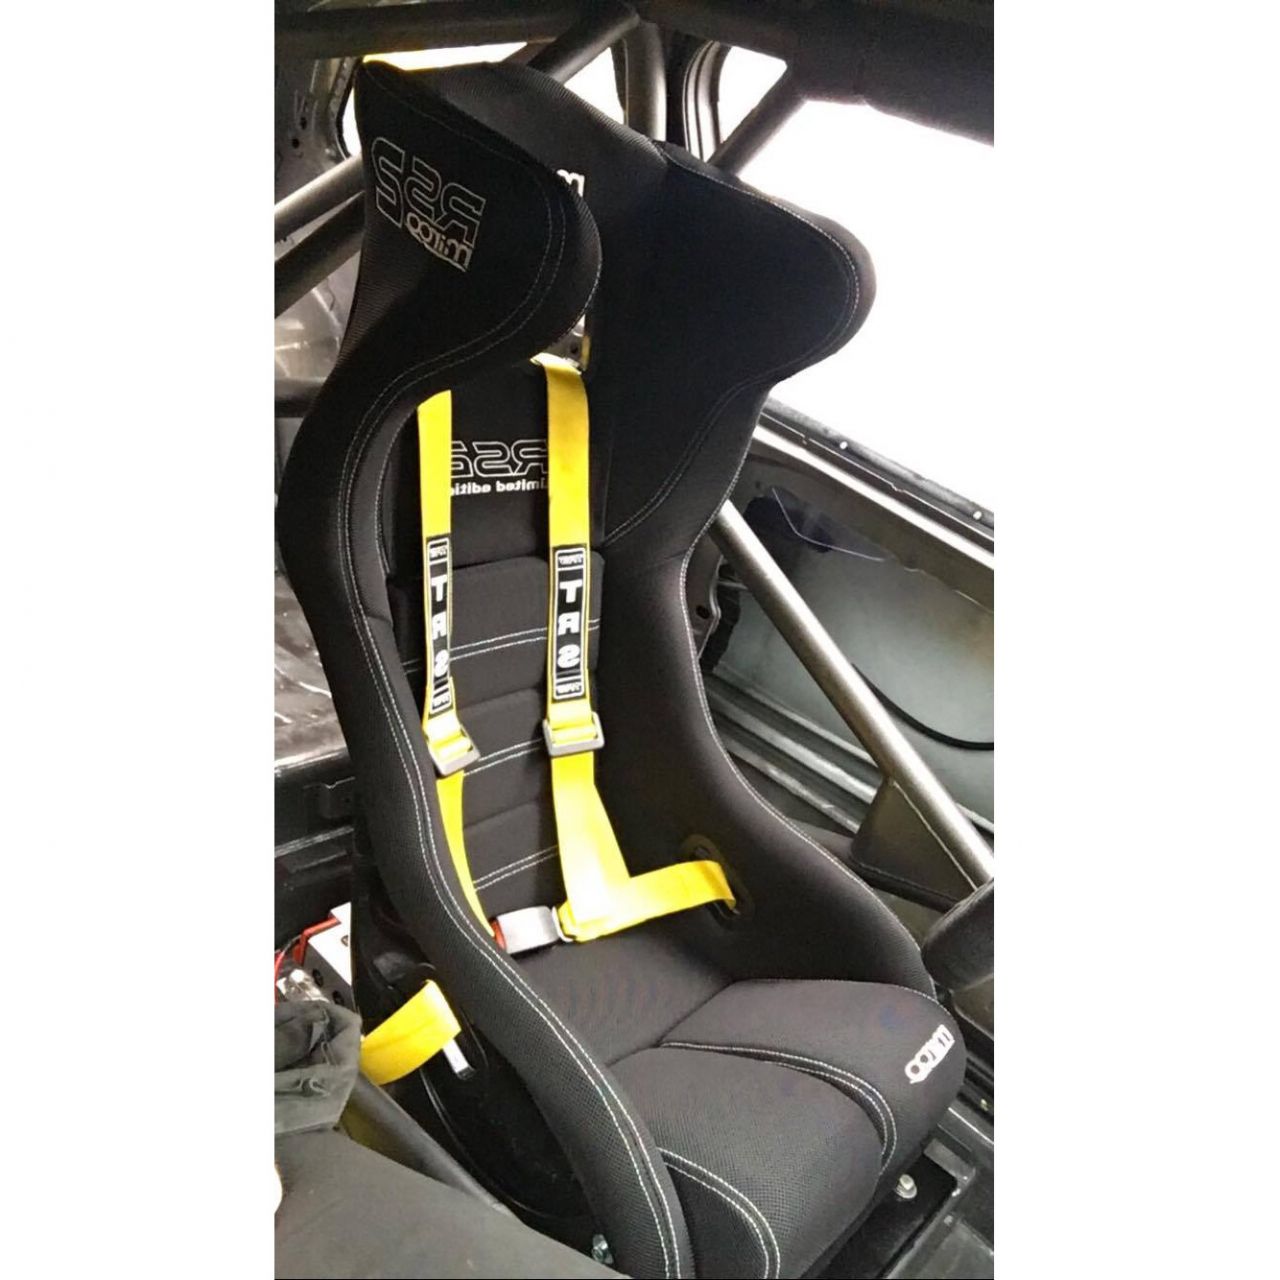 Mirco%20RS2%20Motorsport%20seats%20with%20yellow%20TRS%20harness%201m.jpg